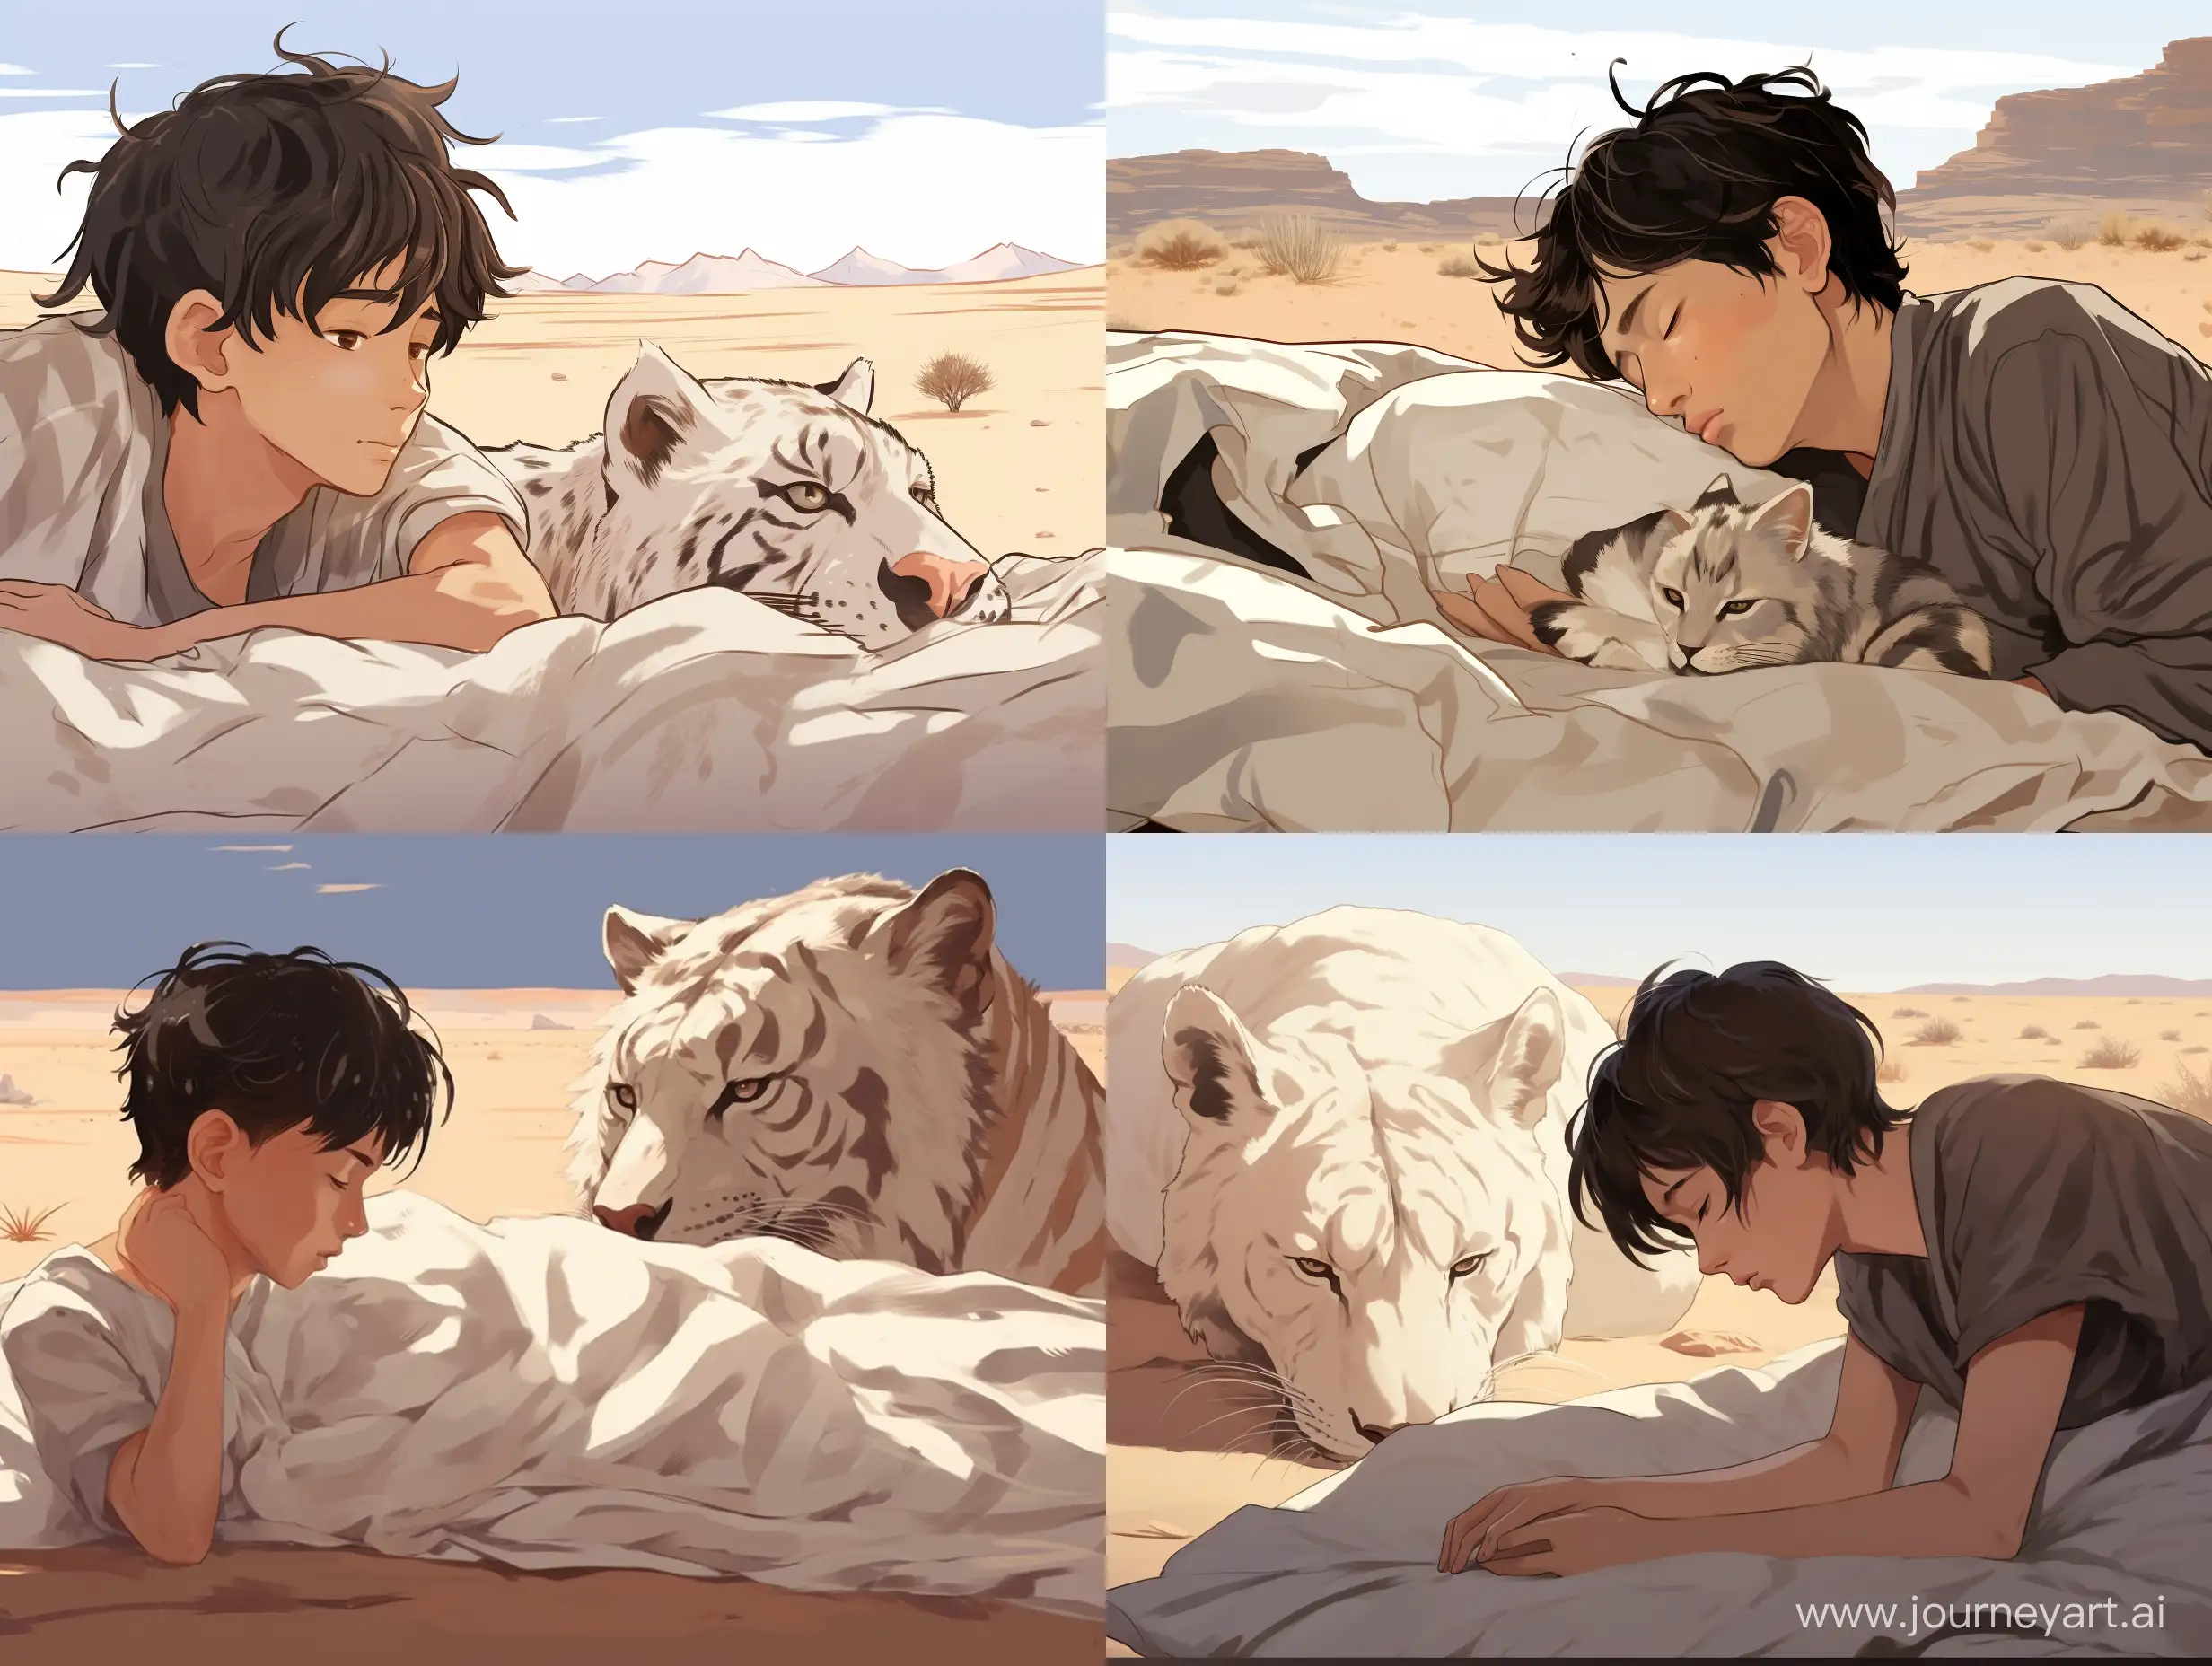 everything can be seen at a distance of 2 meters from an ordinary boy who is 180 cm tall, Asian, you can't see his face but you can see well lynx hair covers his eyes, black desert, black hair, he sleeps in a white t-shirt, he is spread out in bed, he is facing left side, the hand is under the desert, in the dark without light in the room, he is sleeping, his blanket is black, the blanket is covered to the waist of the body